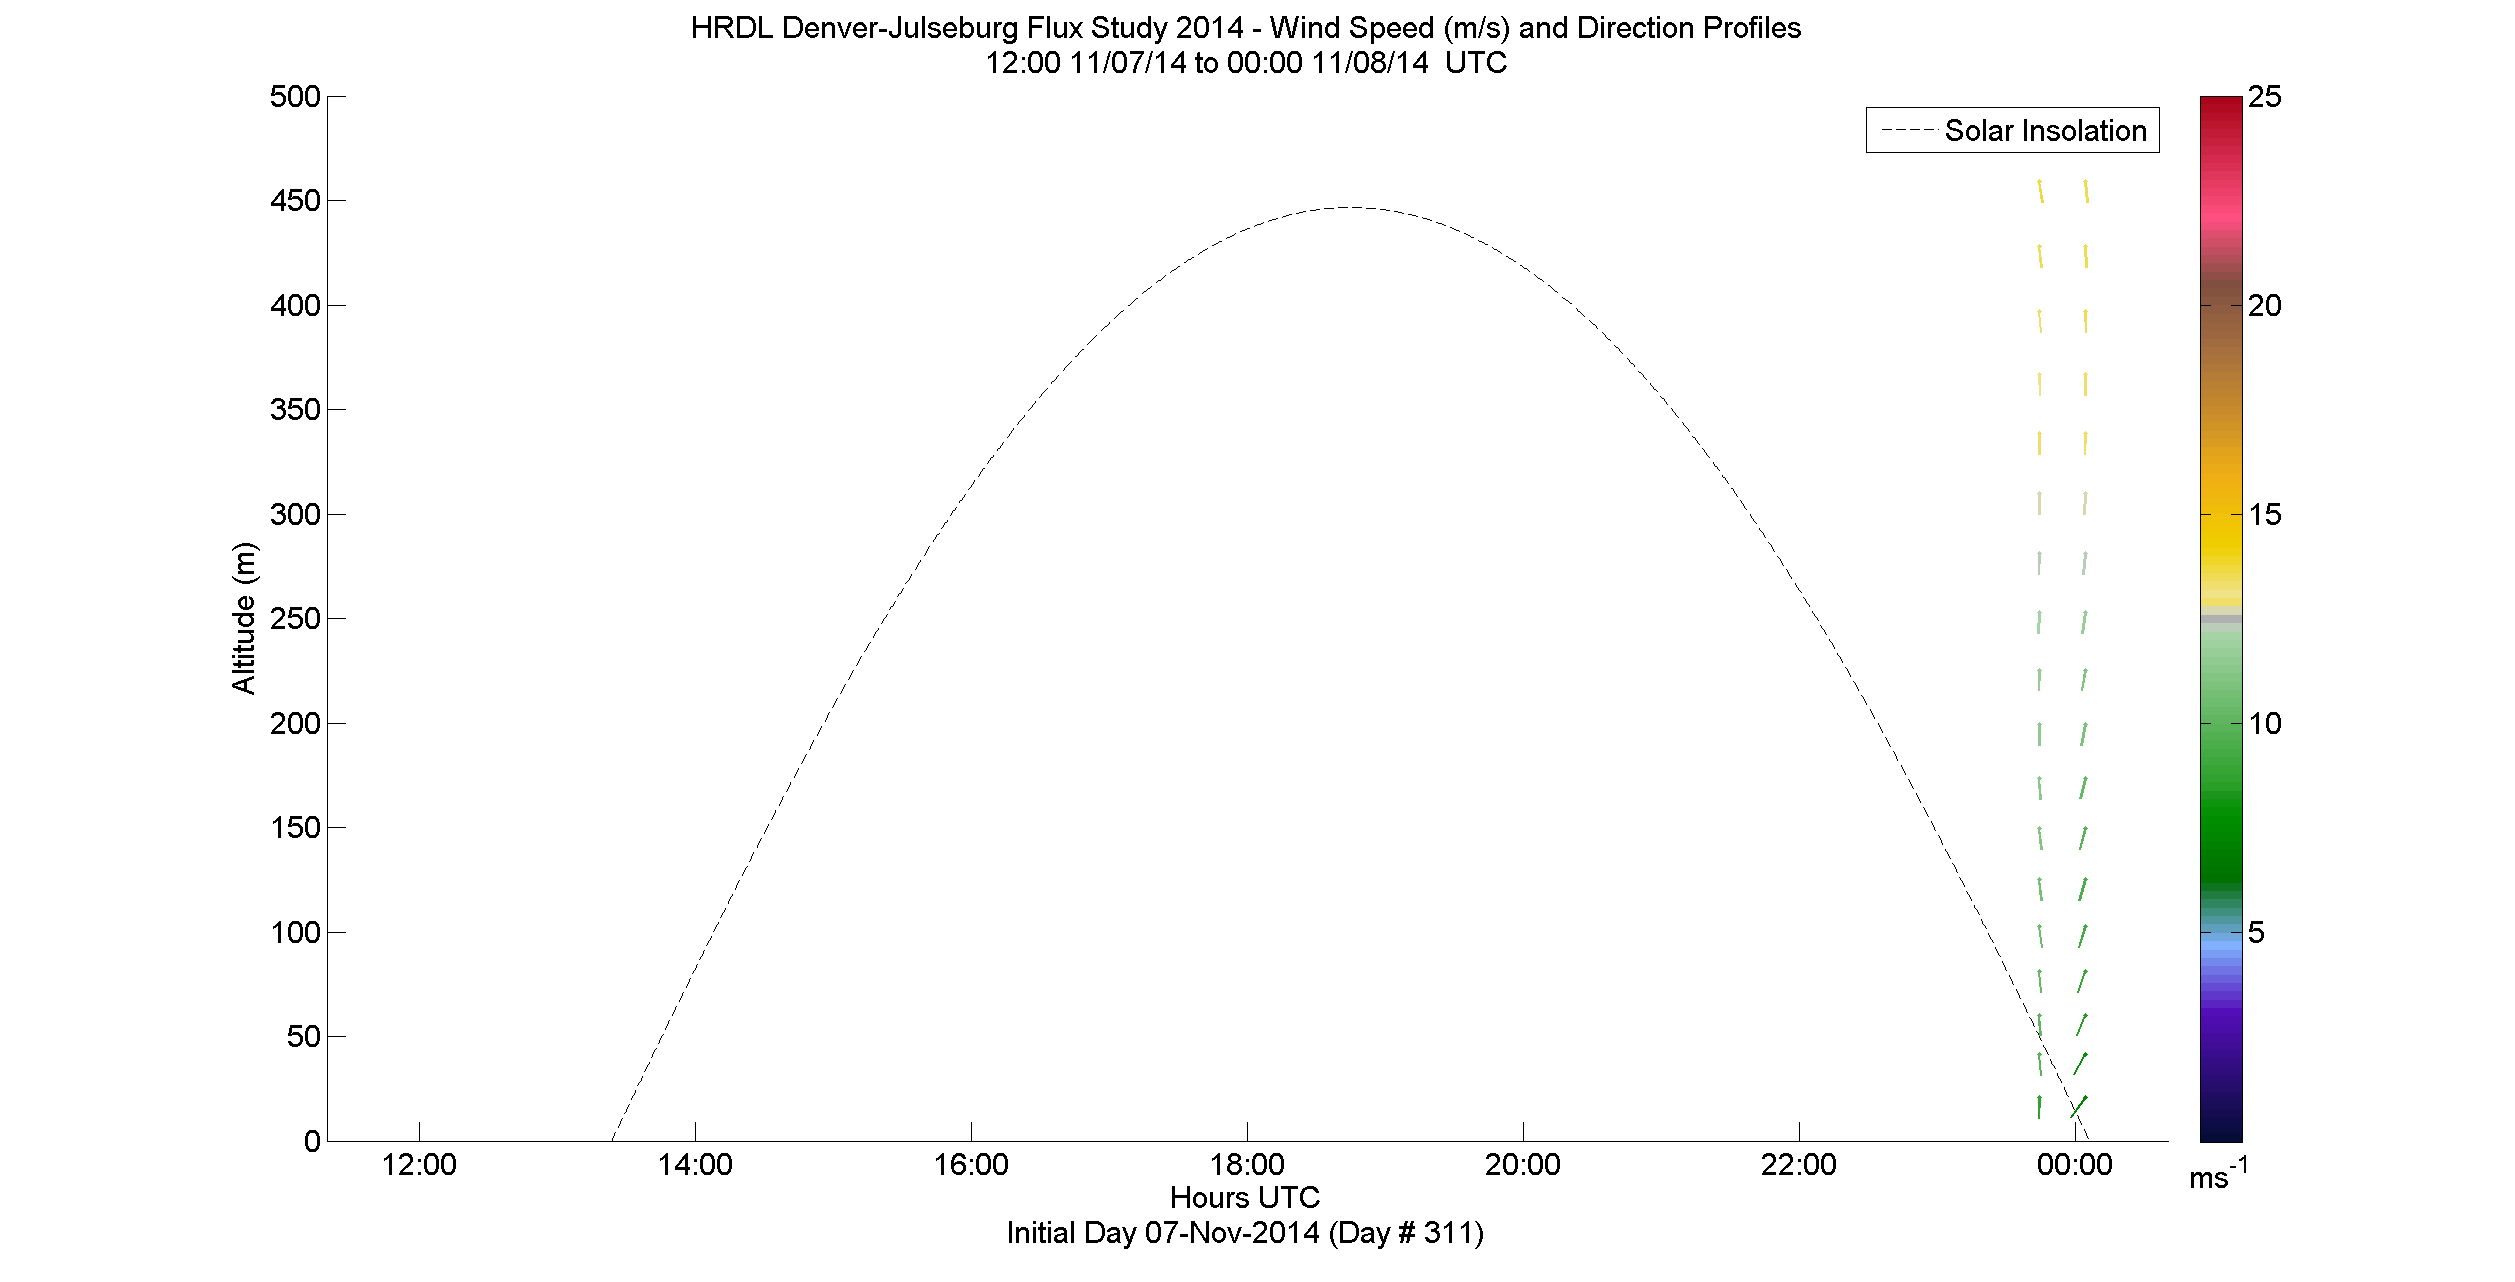 HRDL speed and direction profile - November 7 pm